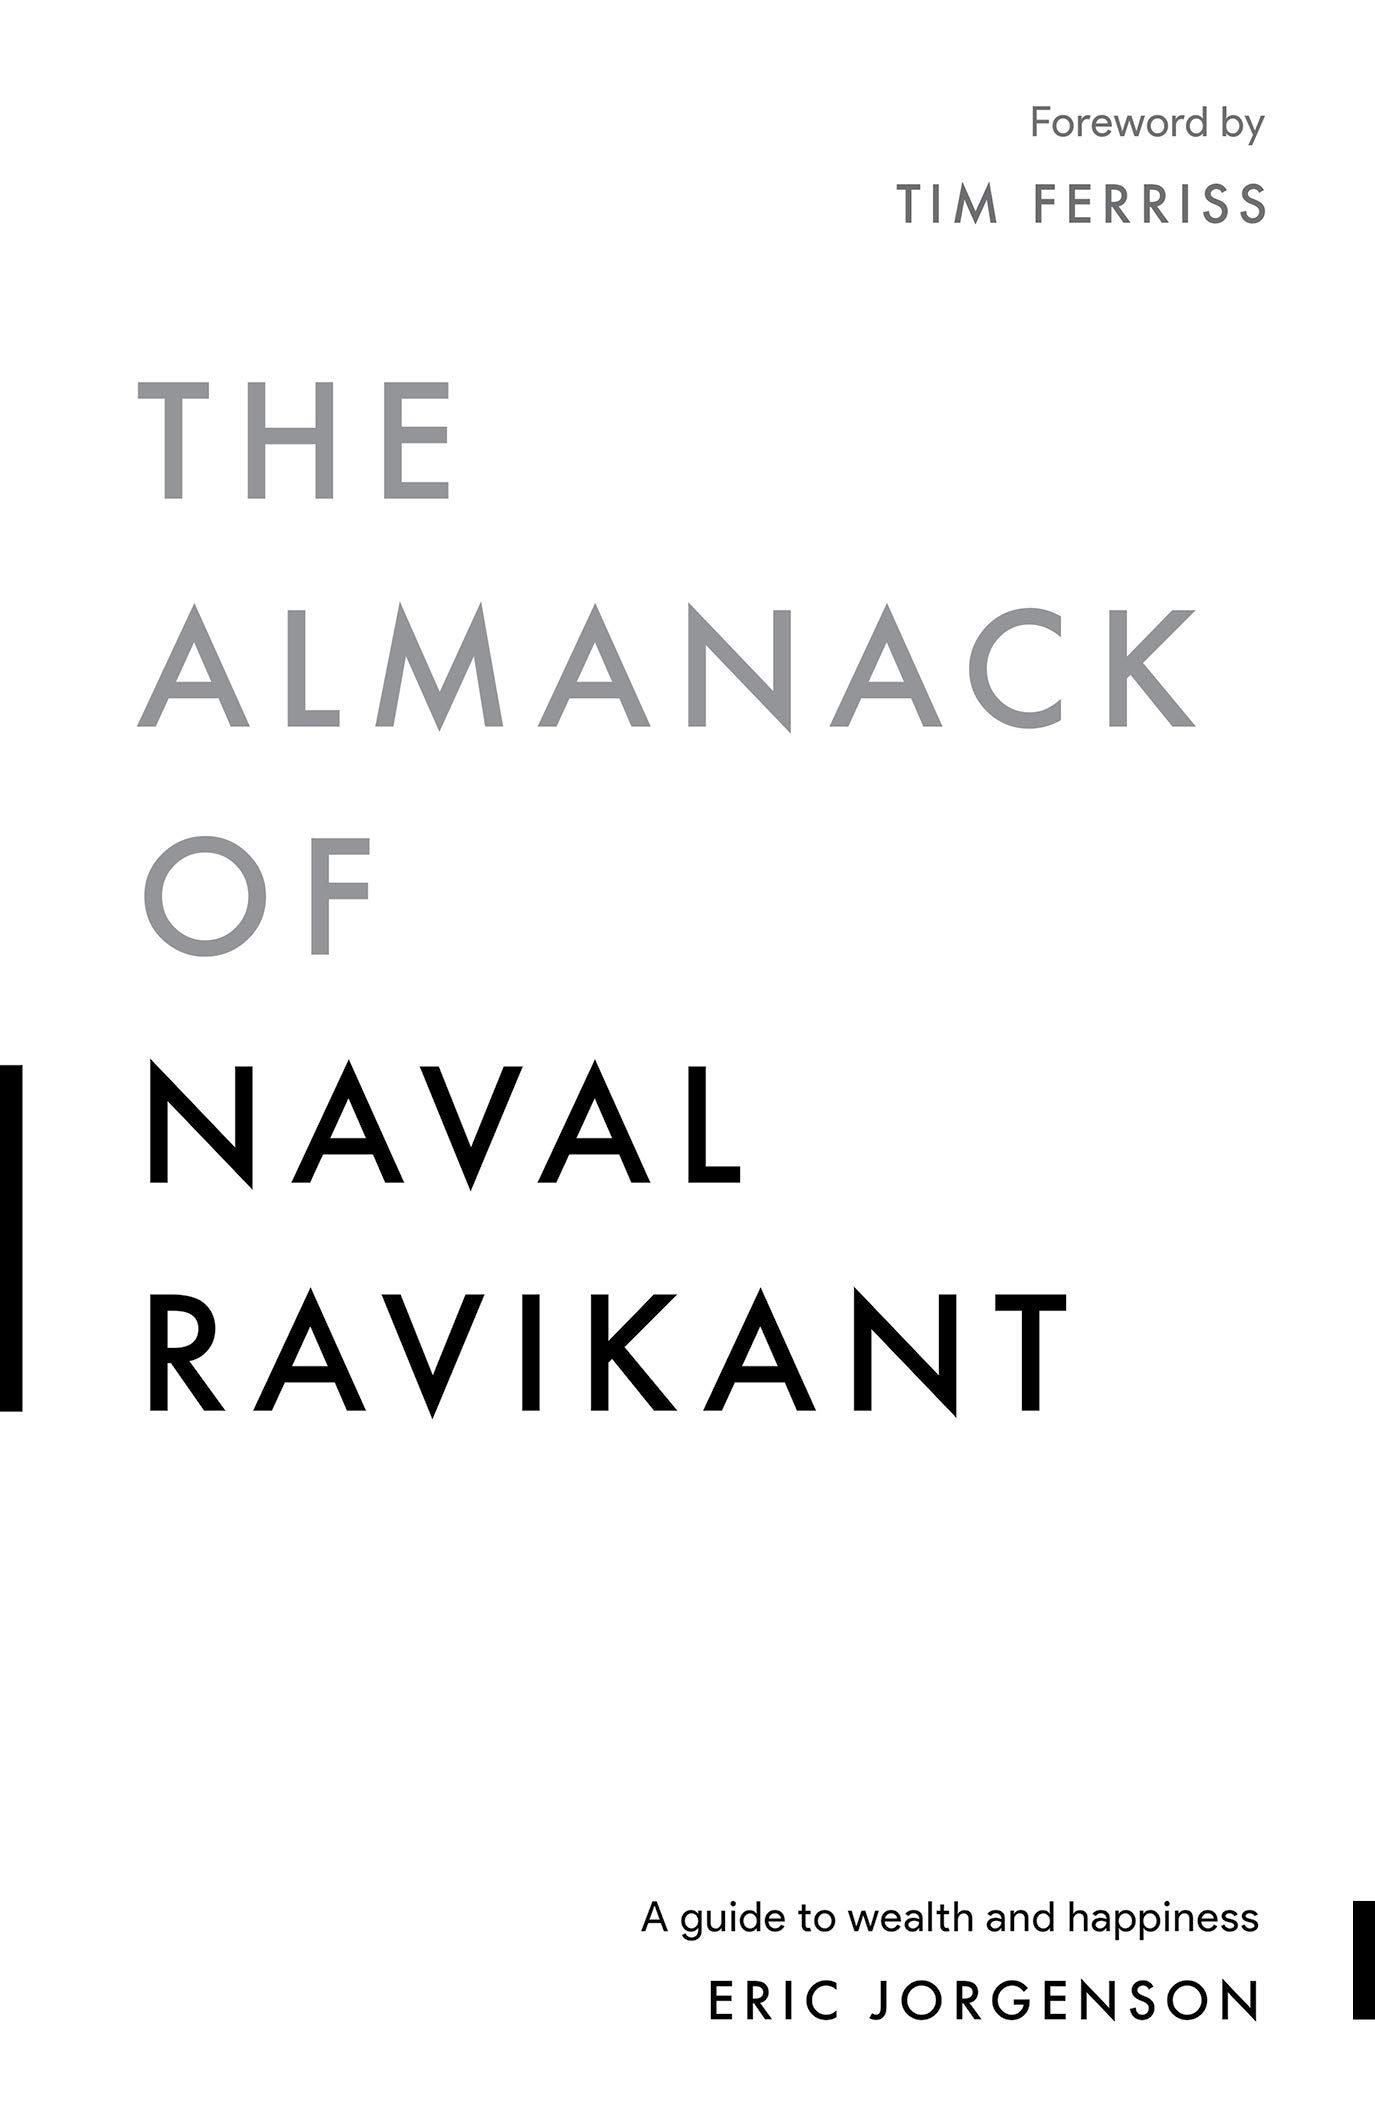 The Almanack of Naval Ravikant Summary Review